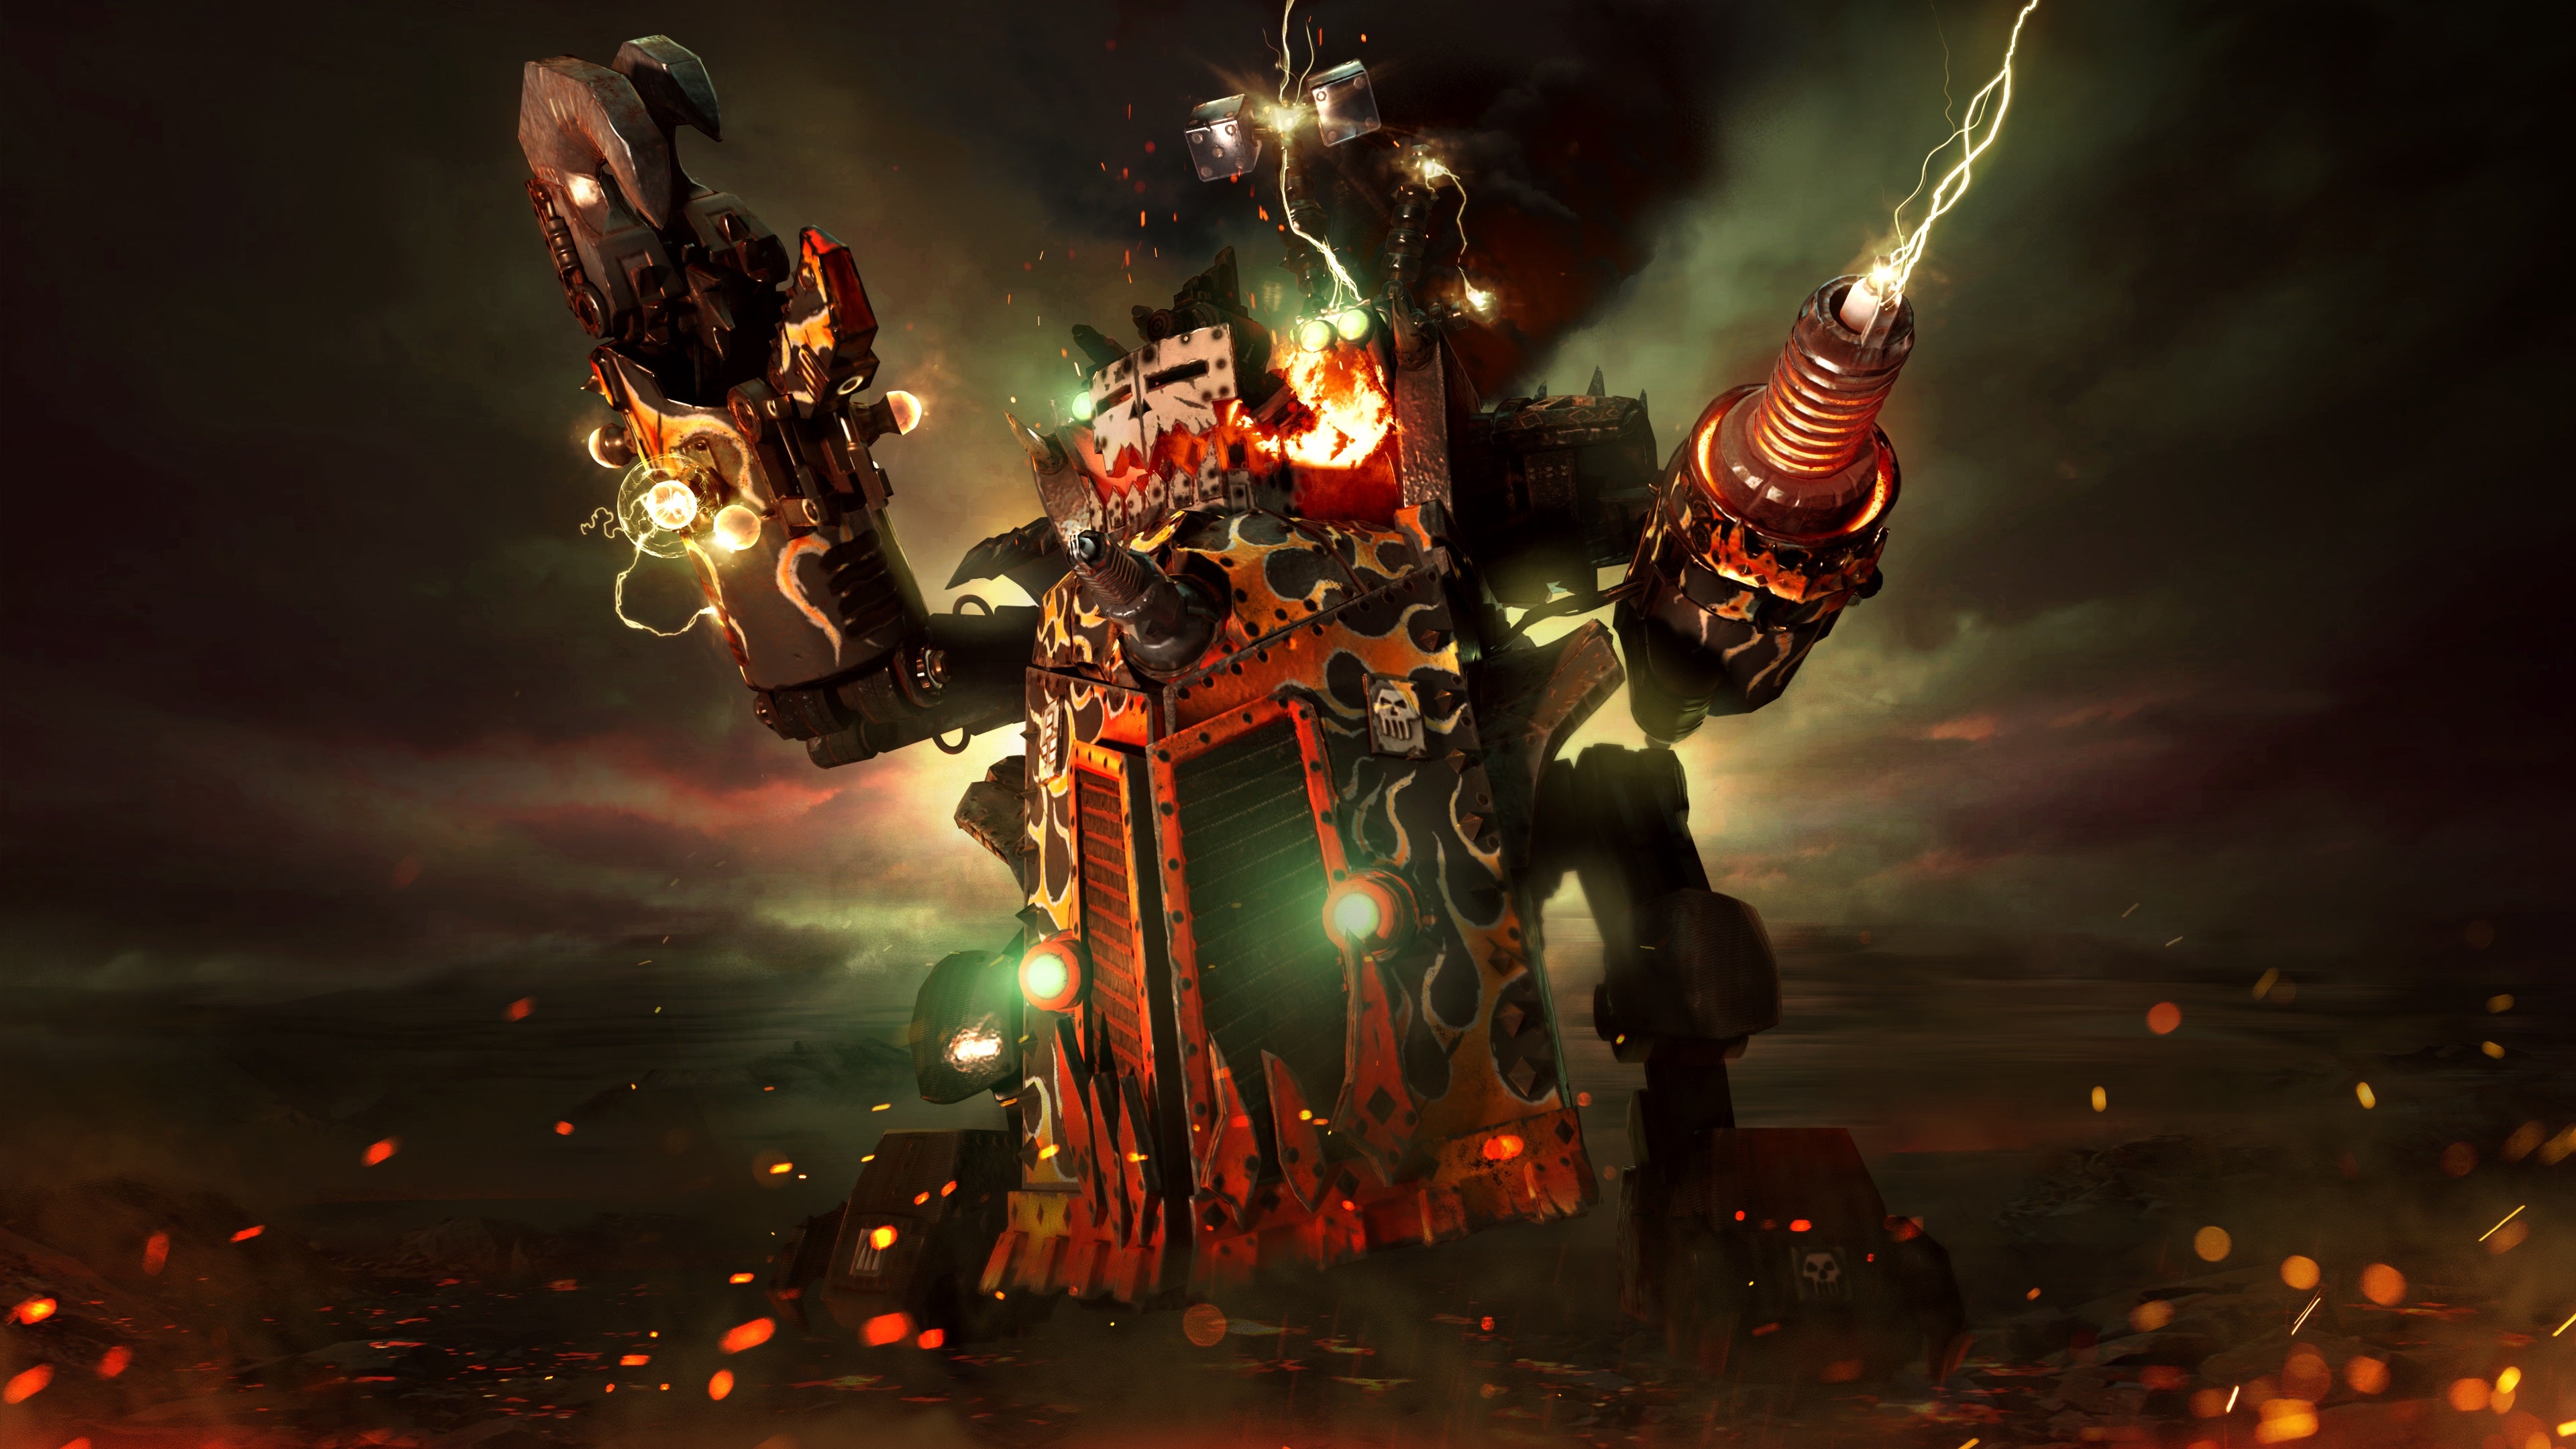 Image for Warhammer 40,000: Dawn of War 3 - playing Eldar, Ork & Space Marine factions off against each other